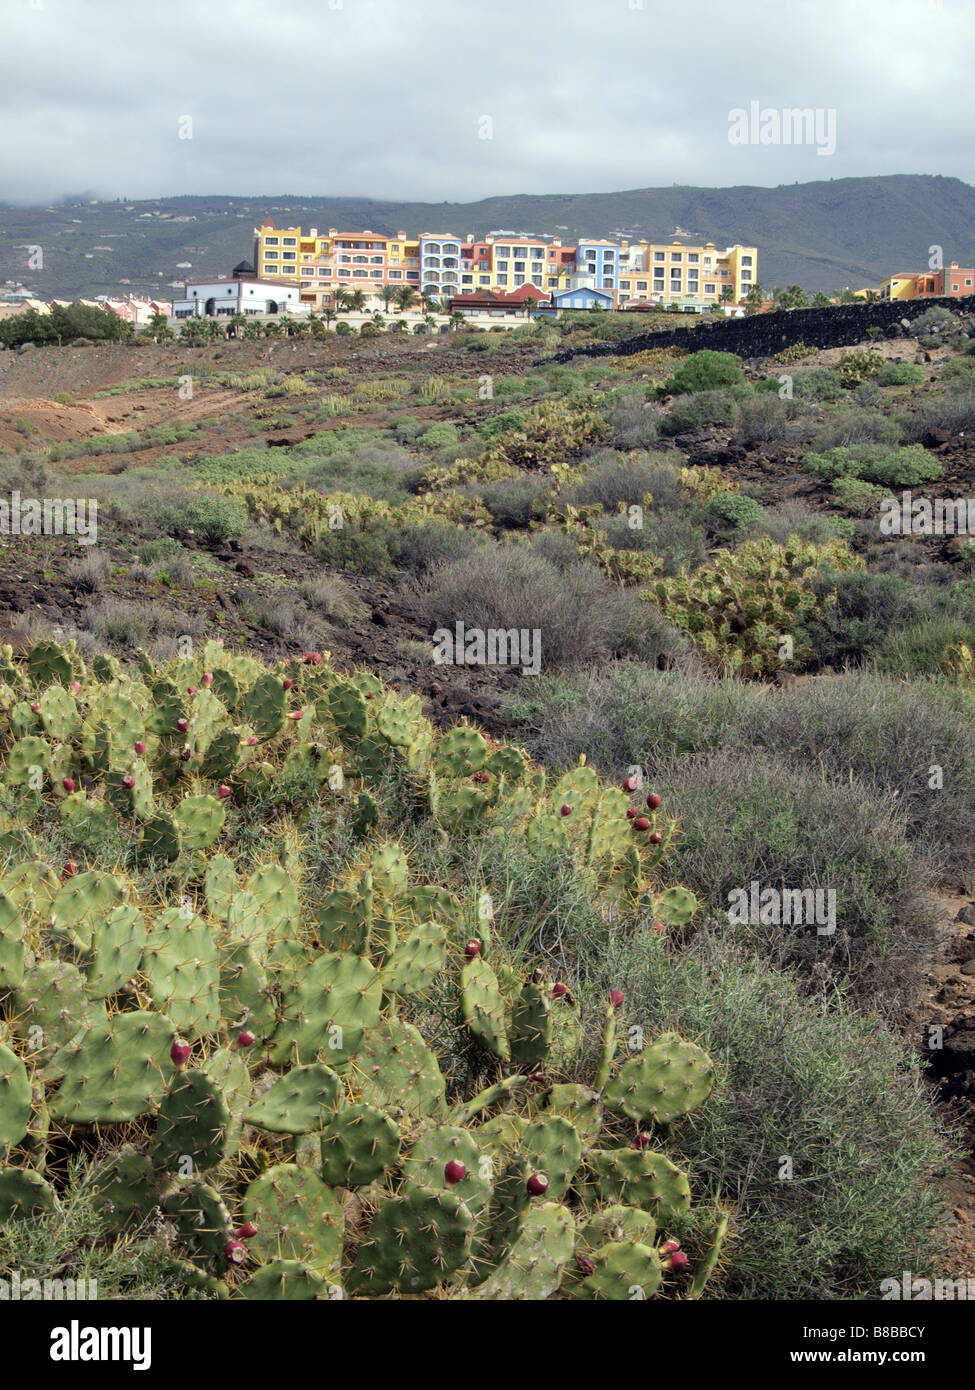 Colourful houses with scrub land in the forground at Playa Parasio, Costa Adeje, Tenerife. Stock Photo